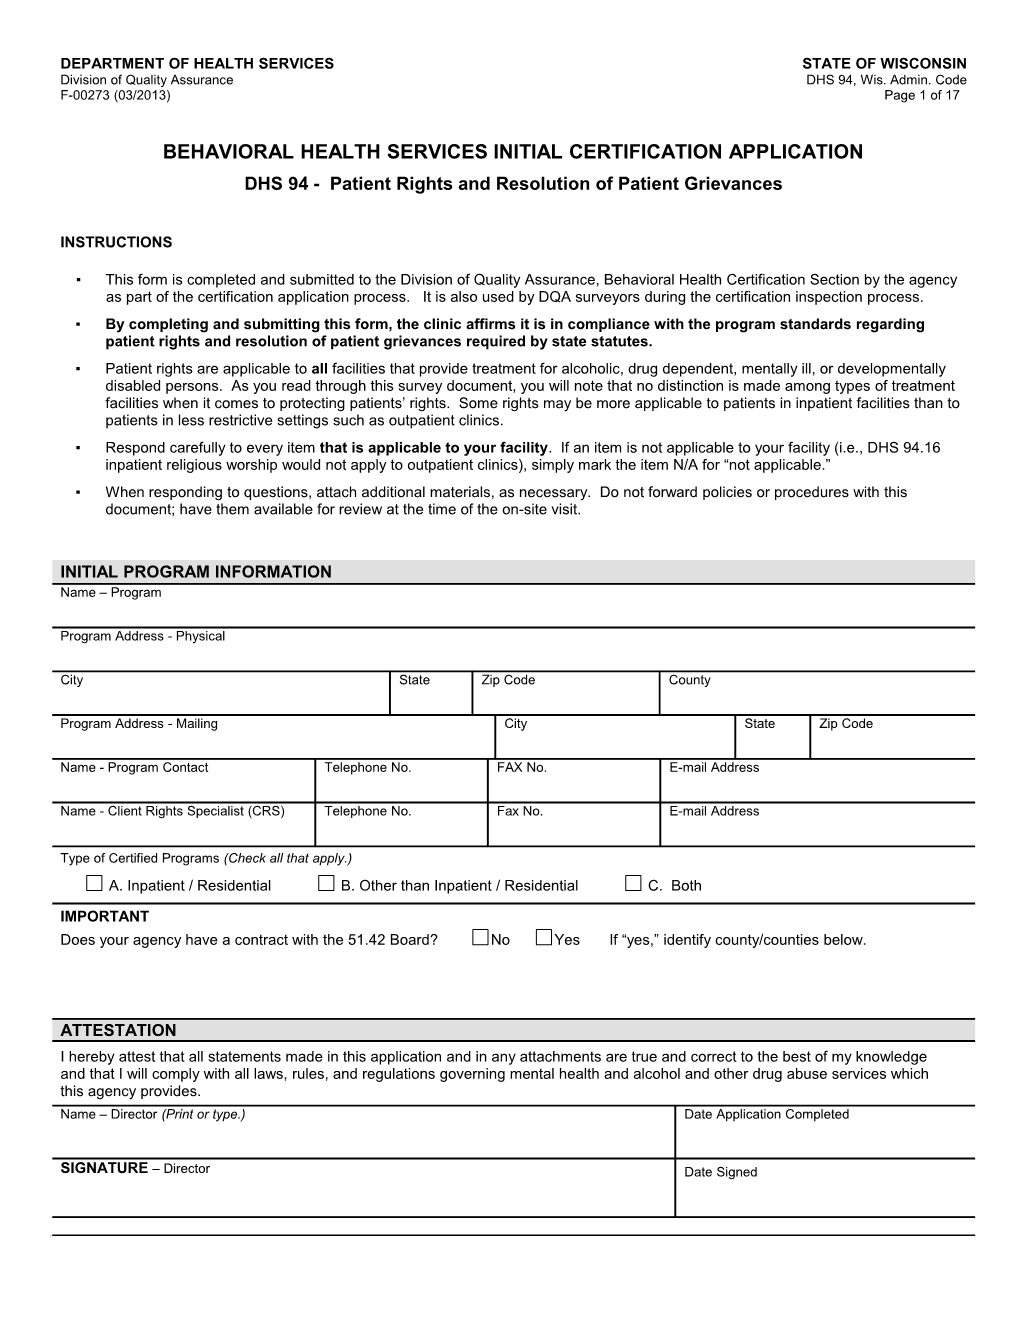 Behavioral Health Services Initial Certification Appl - DHS 94, F-00273